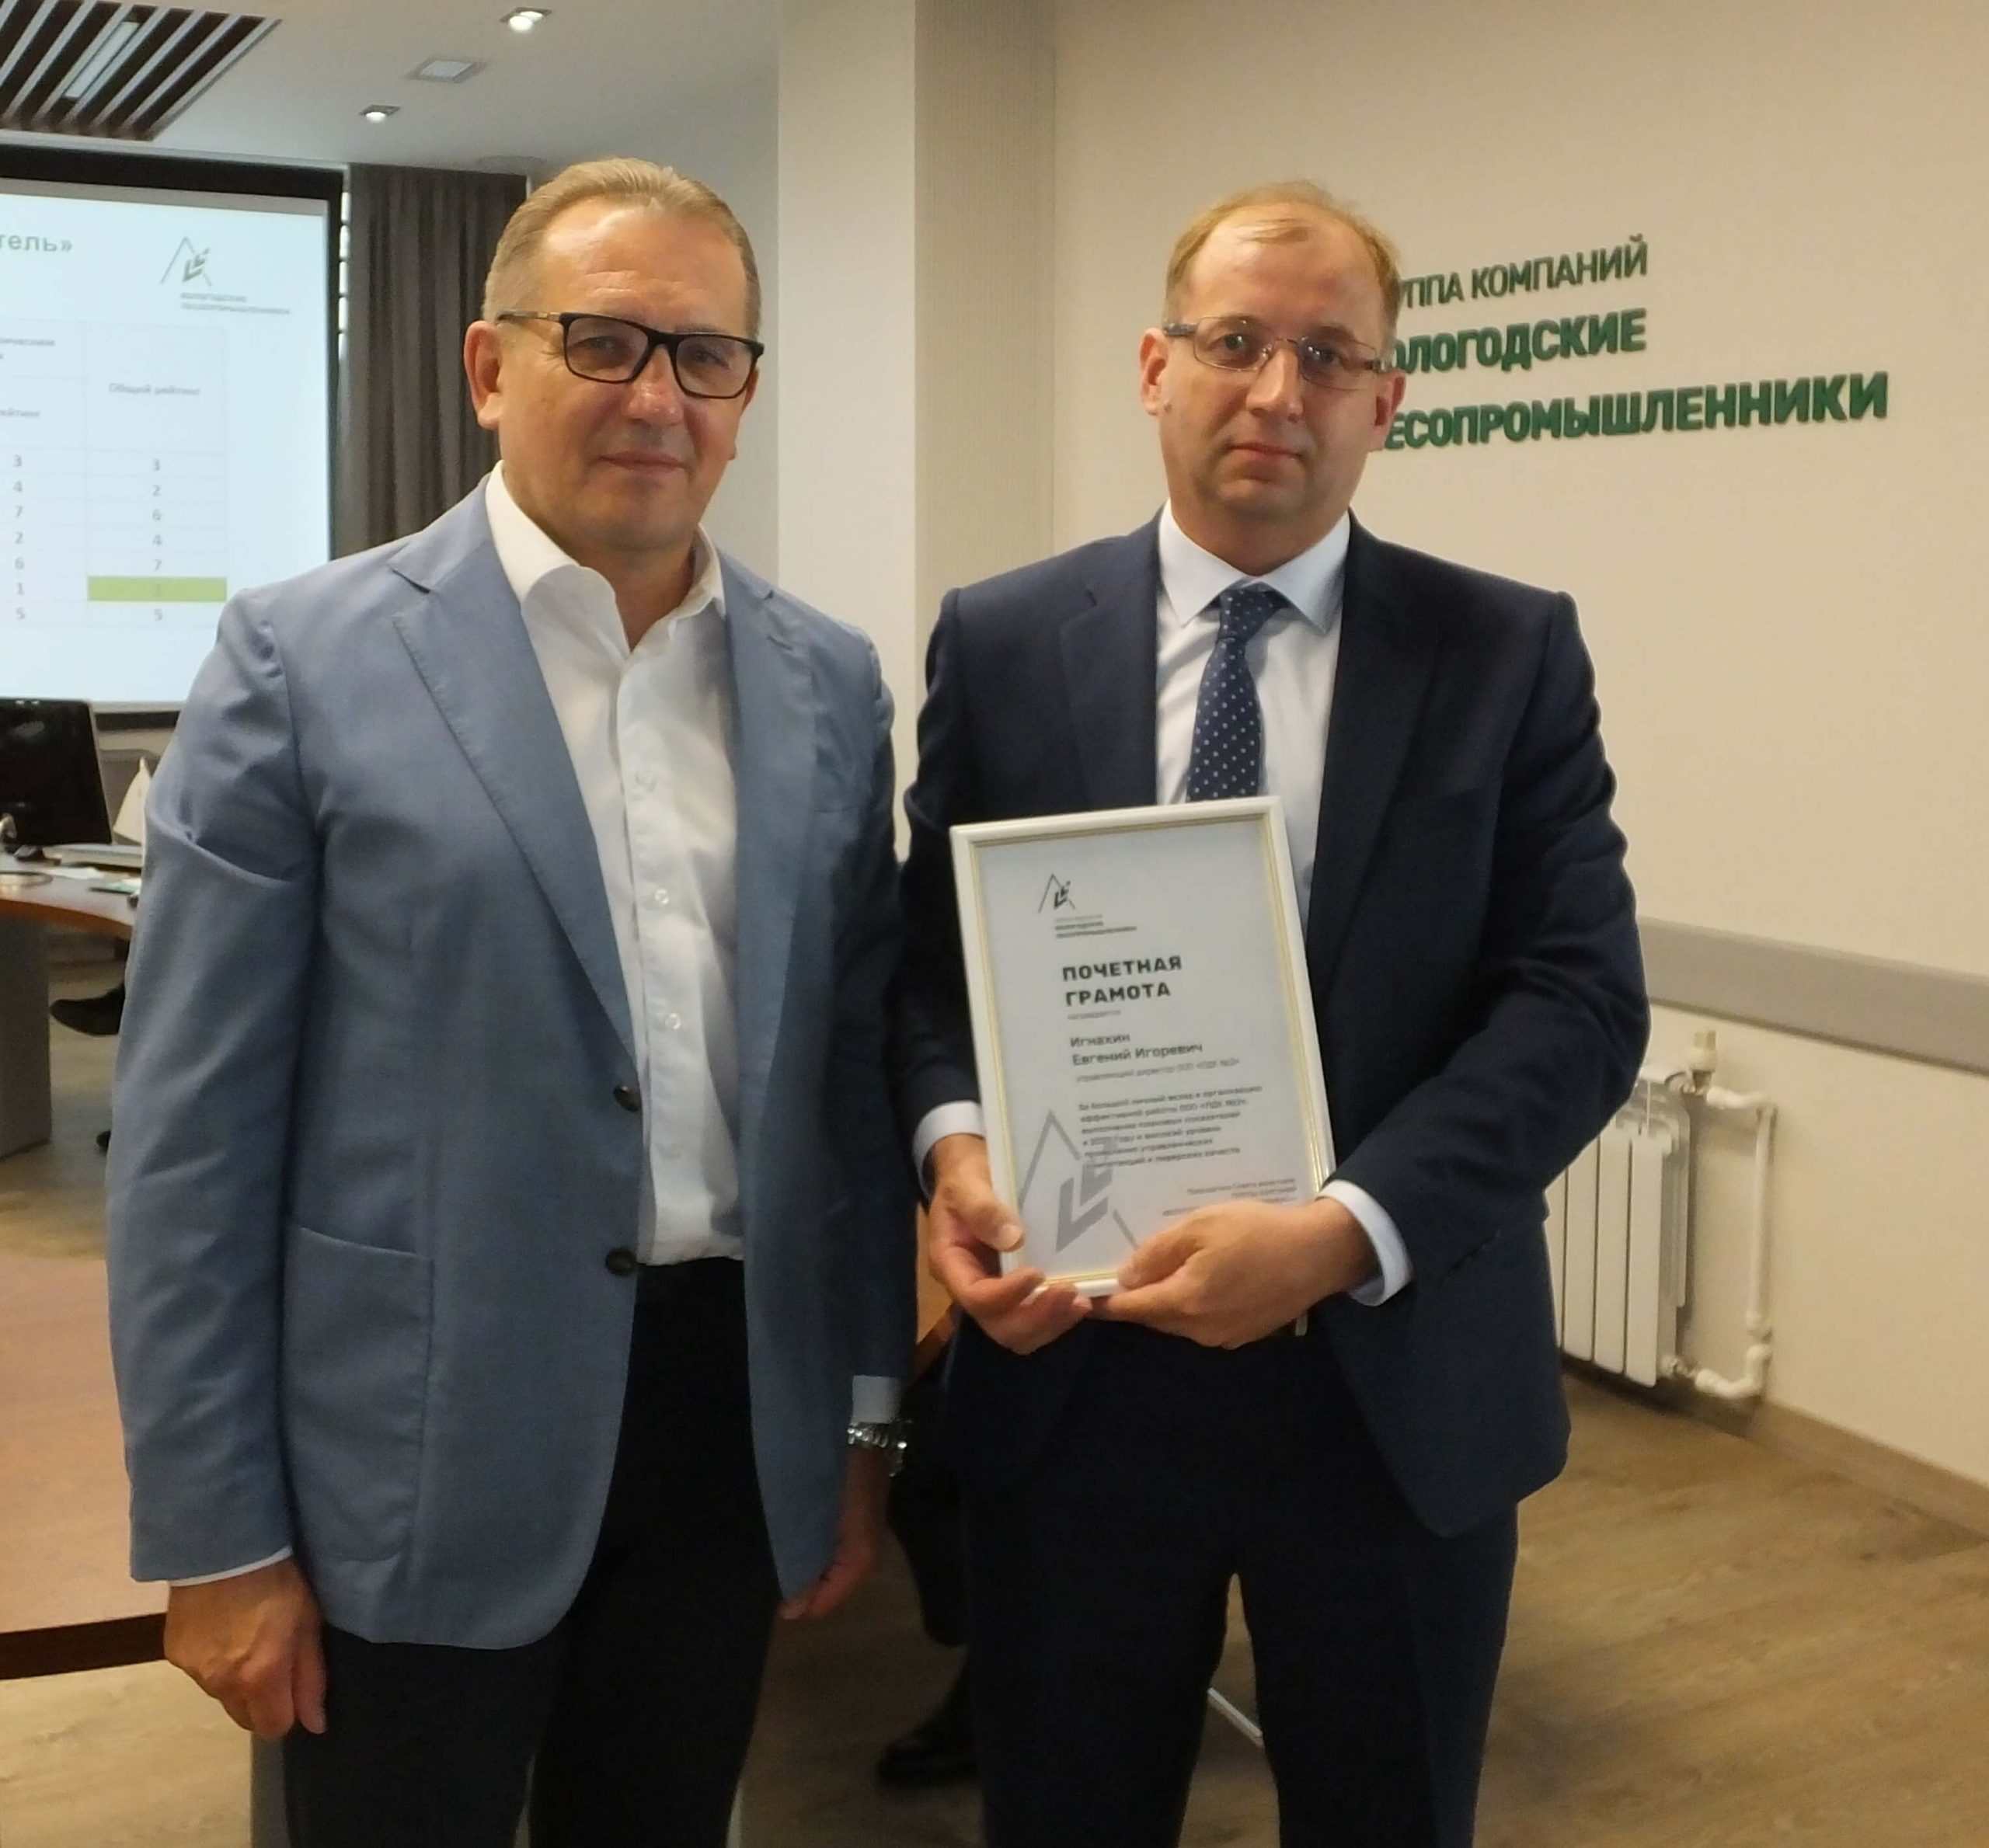 The best manager of the Vologda Timber Industry Group company was determined